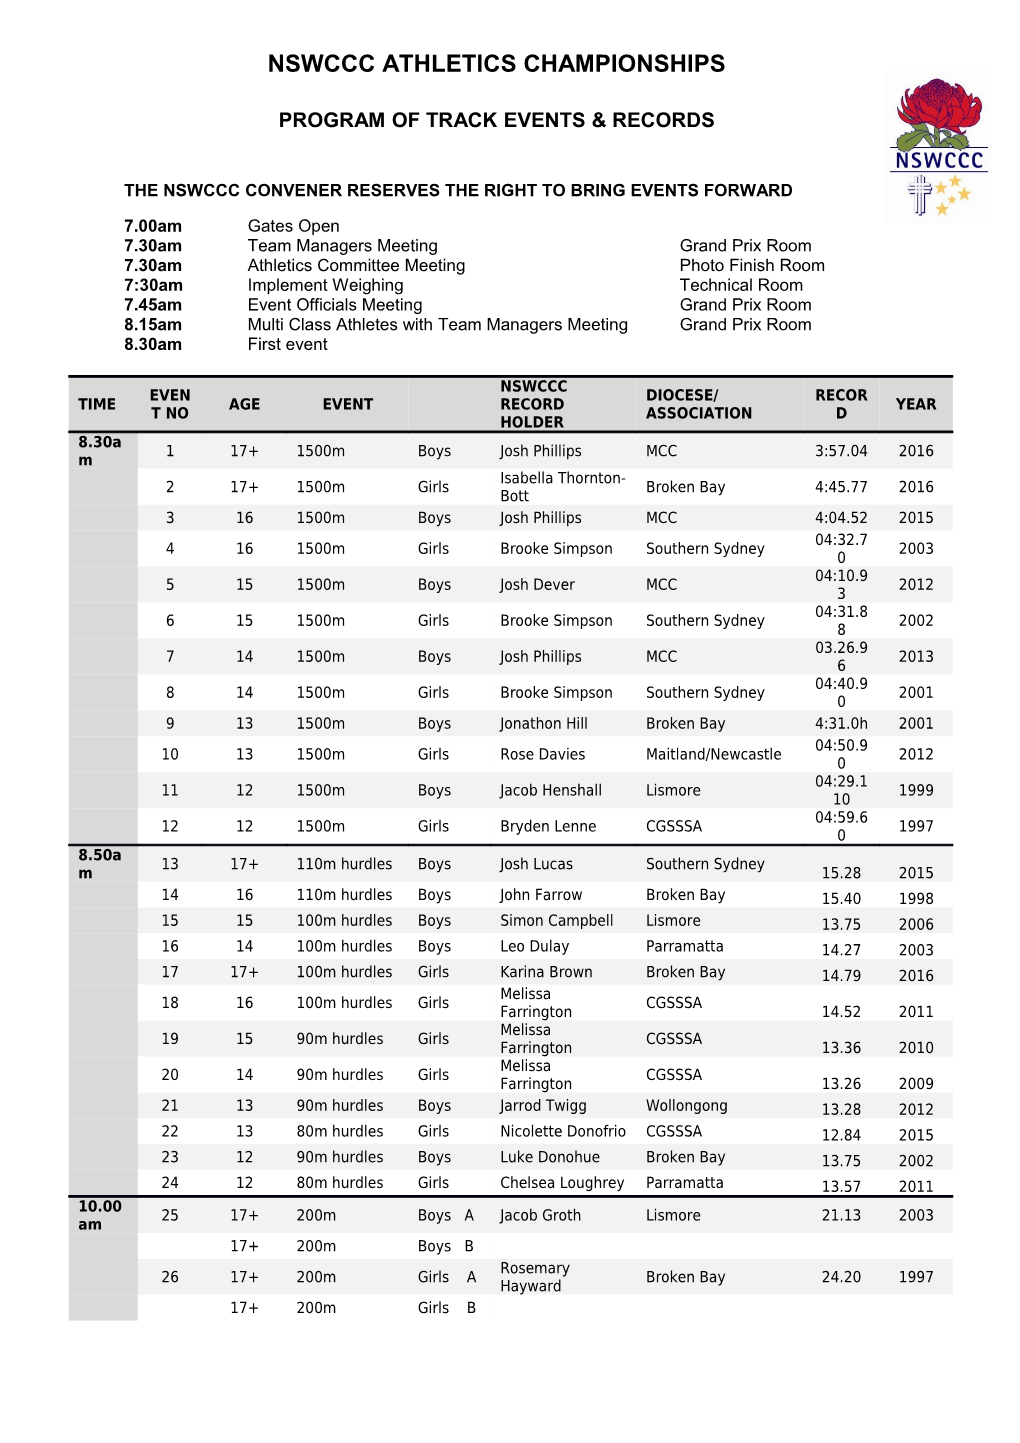 Program of Track Events & Records